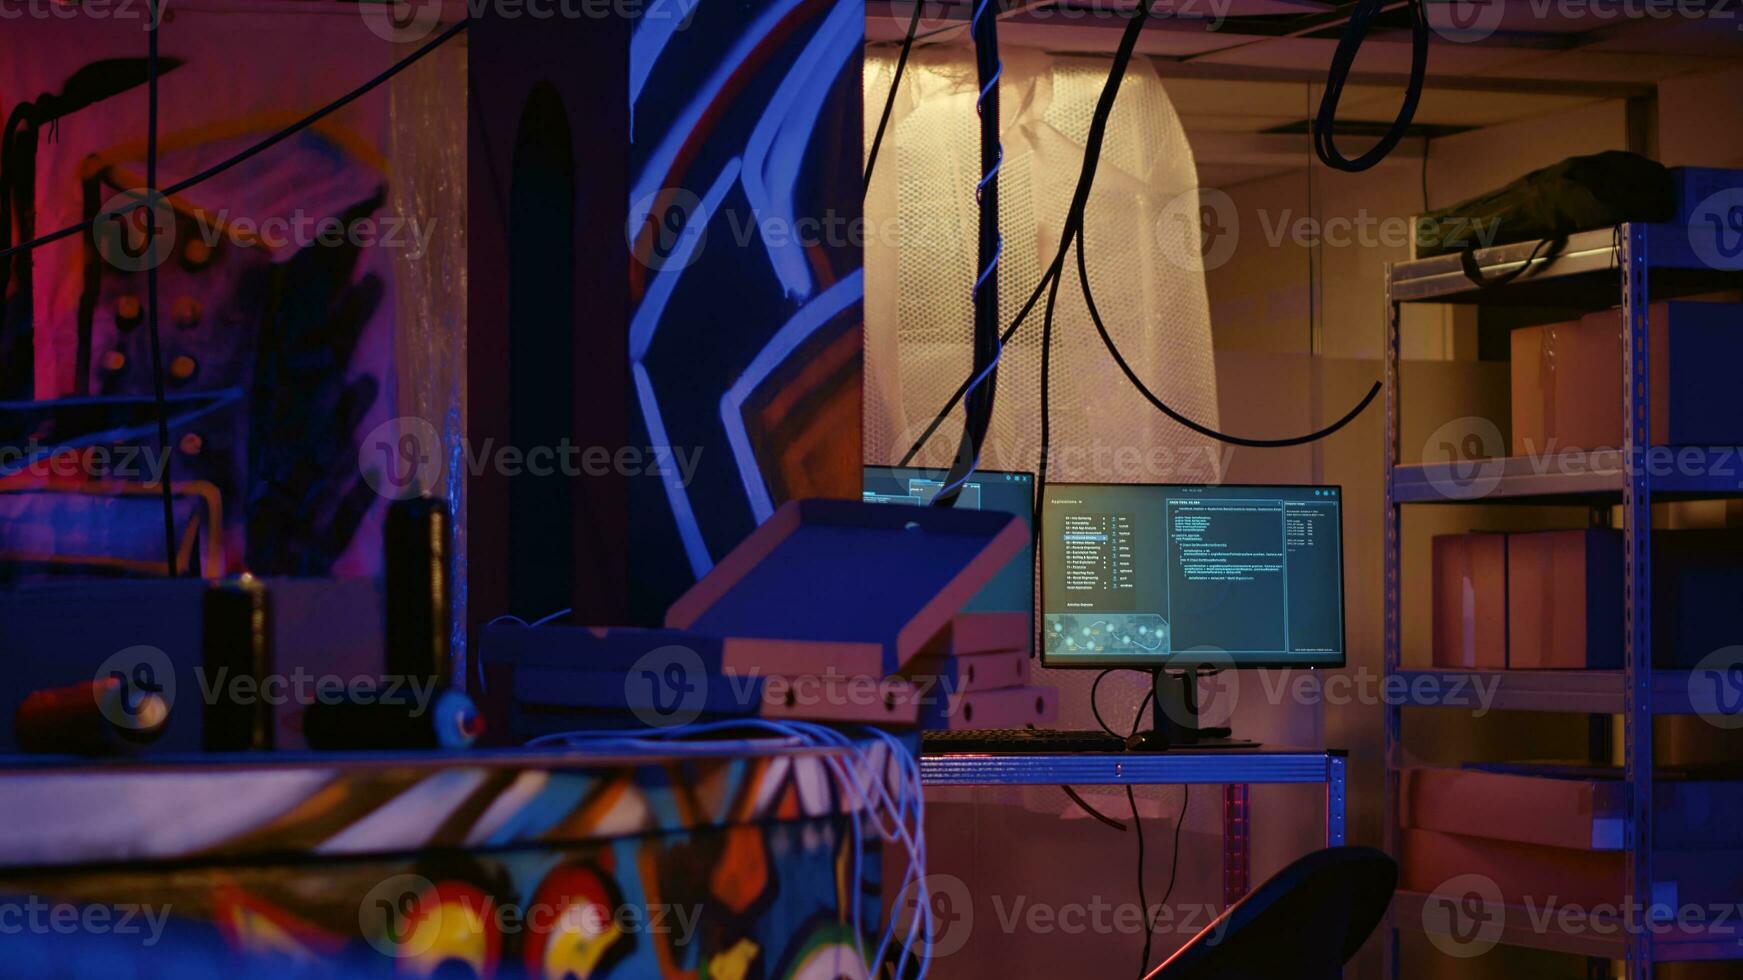 Zoom in on advanced technology computers left open running code in empty neon lit basement with graffiti drawings painted on walls. High tech equipment used by hackers in underground warehouse photo